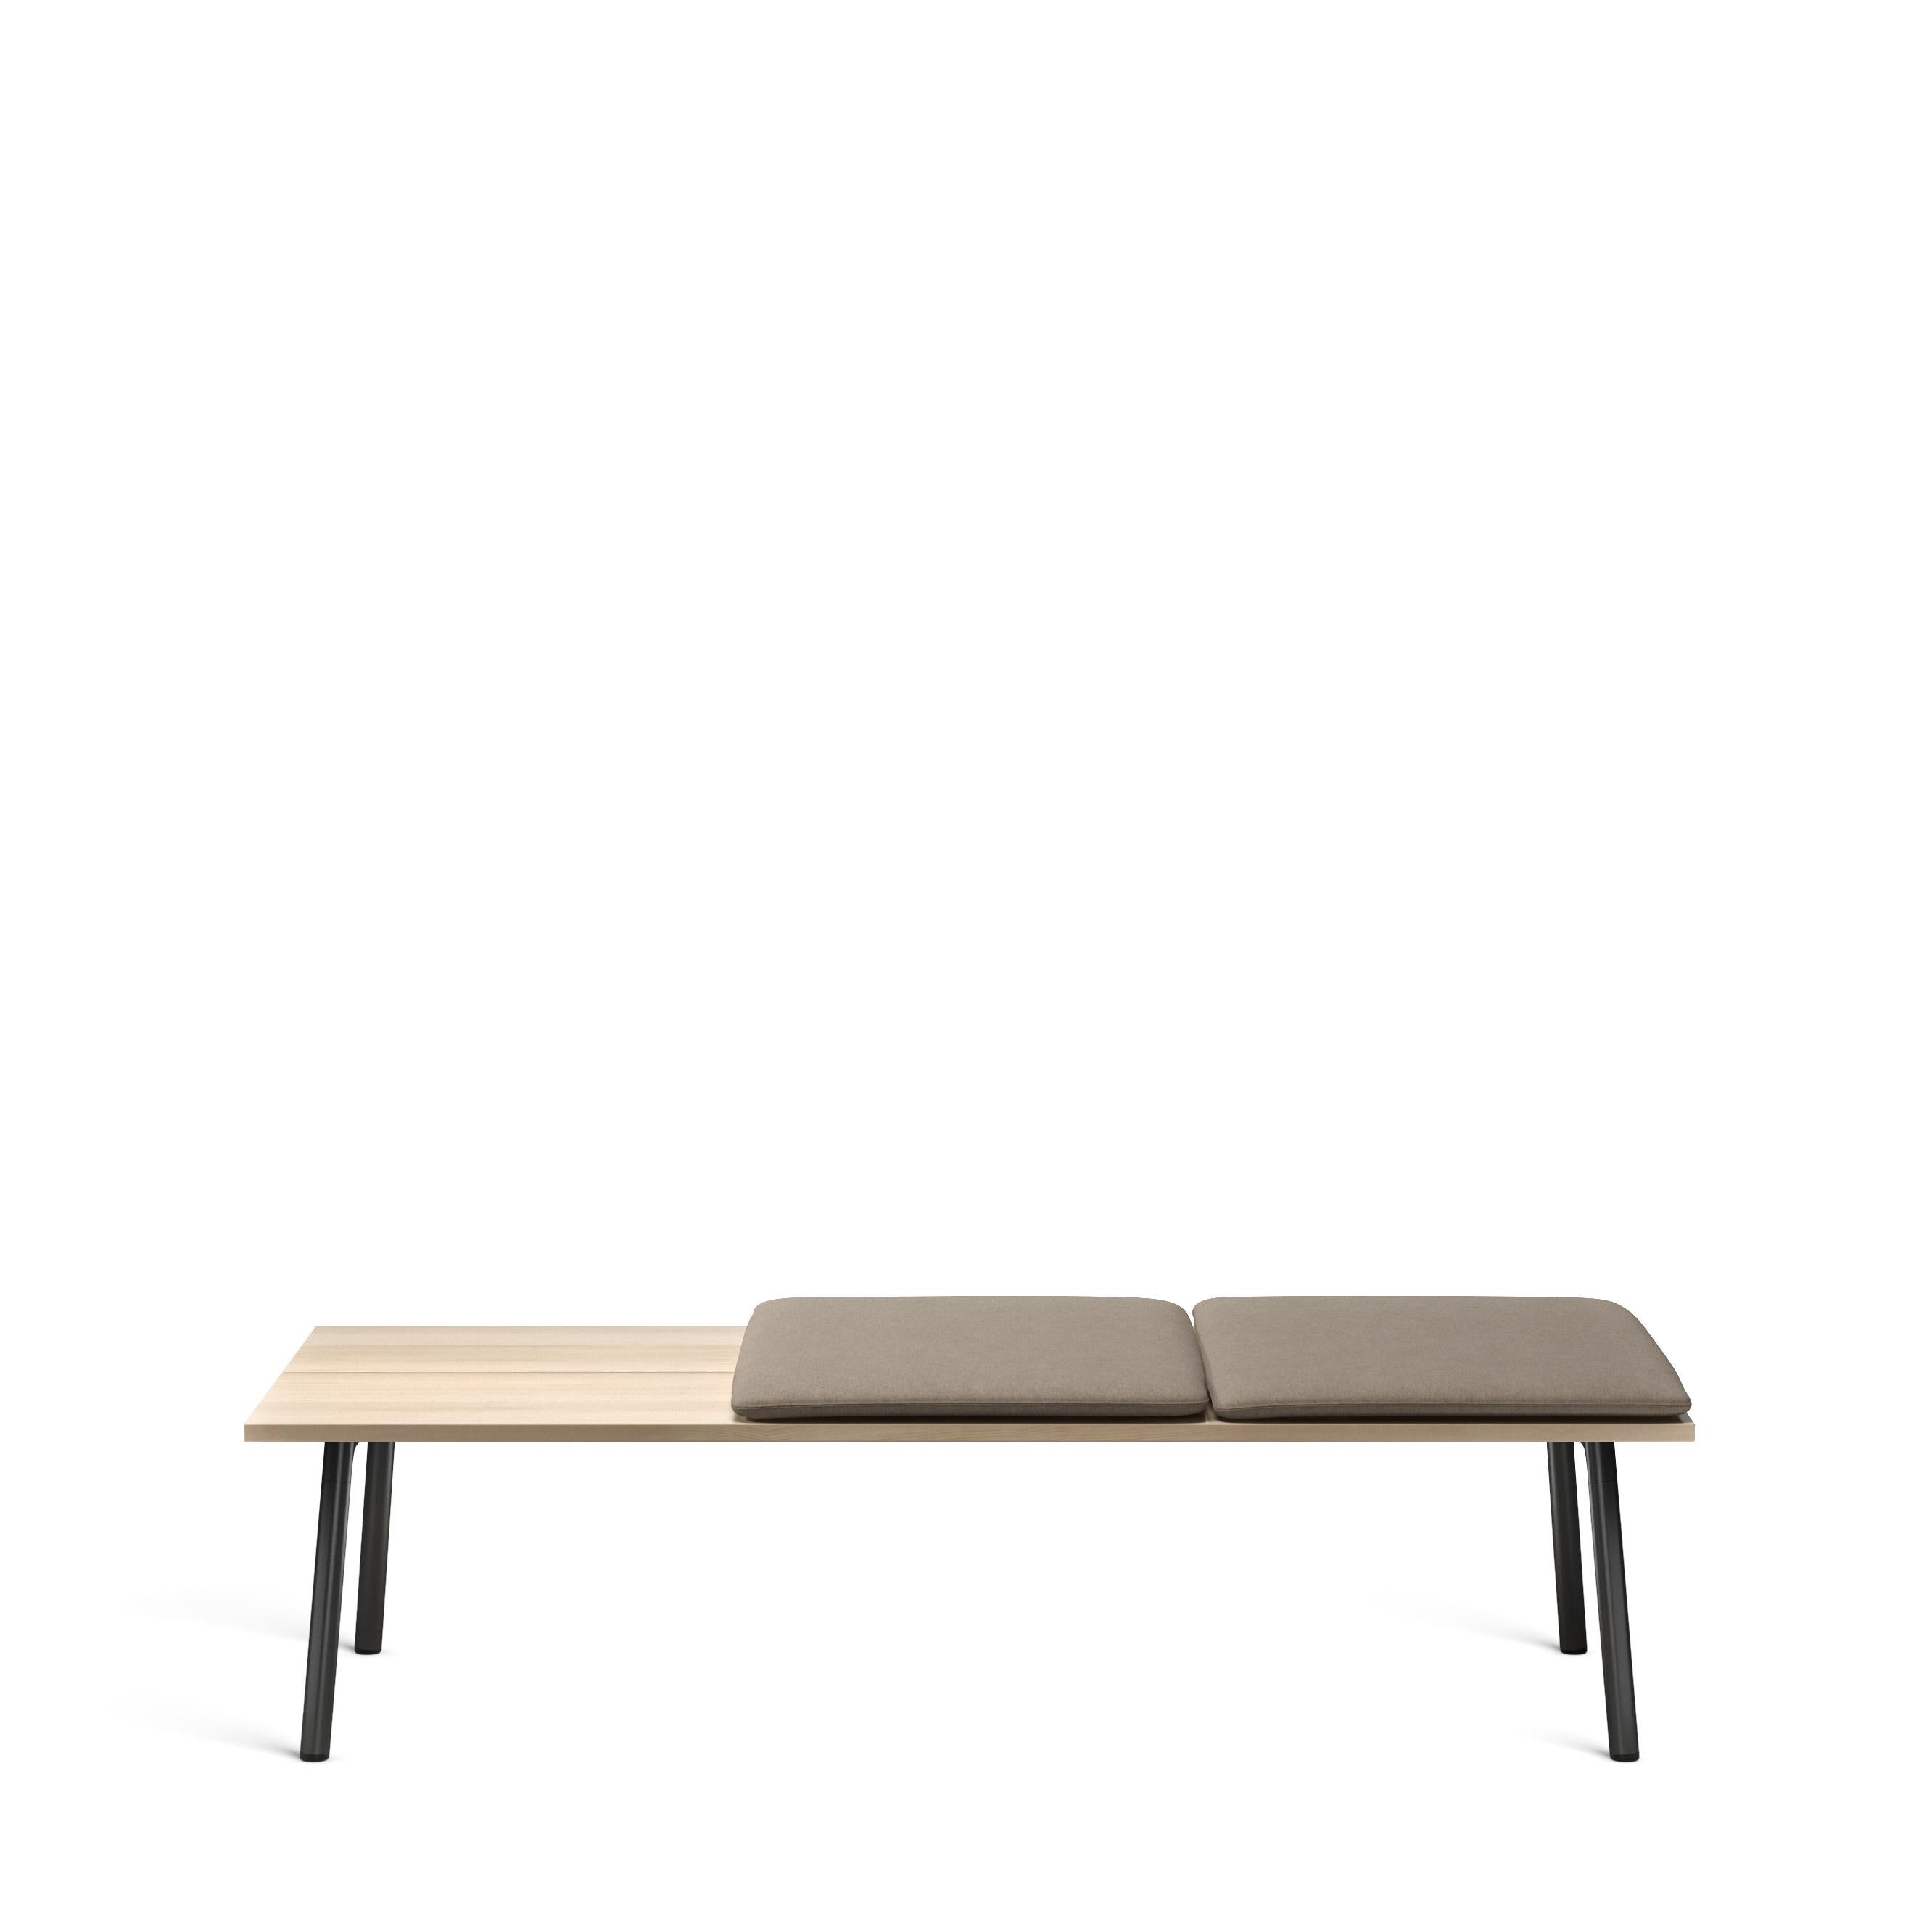 Run is a collection of tables, benches and shelves by Sam Hecht and Kim Colin, designers of the simple and no-nonsense. Run effortlessly finds balance in both indoor and outdoor landscapes suited for meeting, eating, learning, sharing and working.